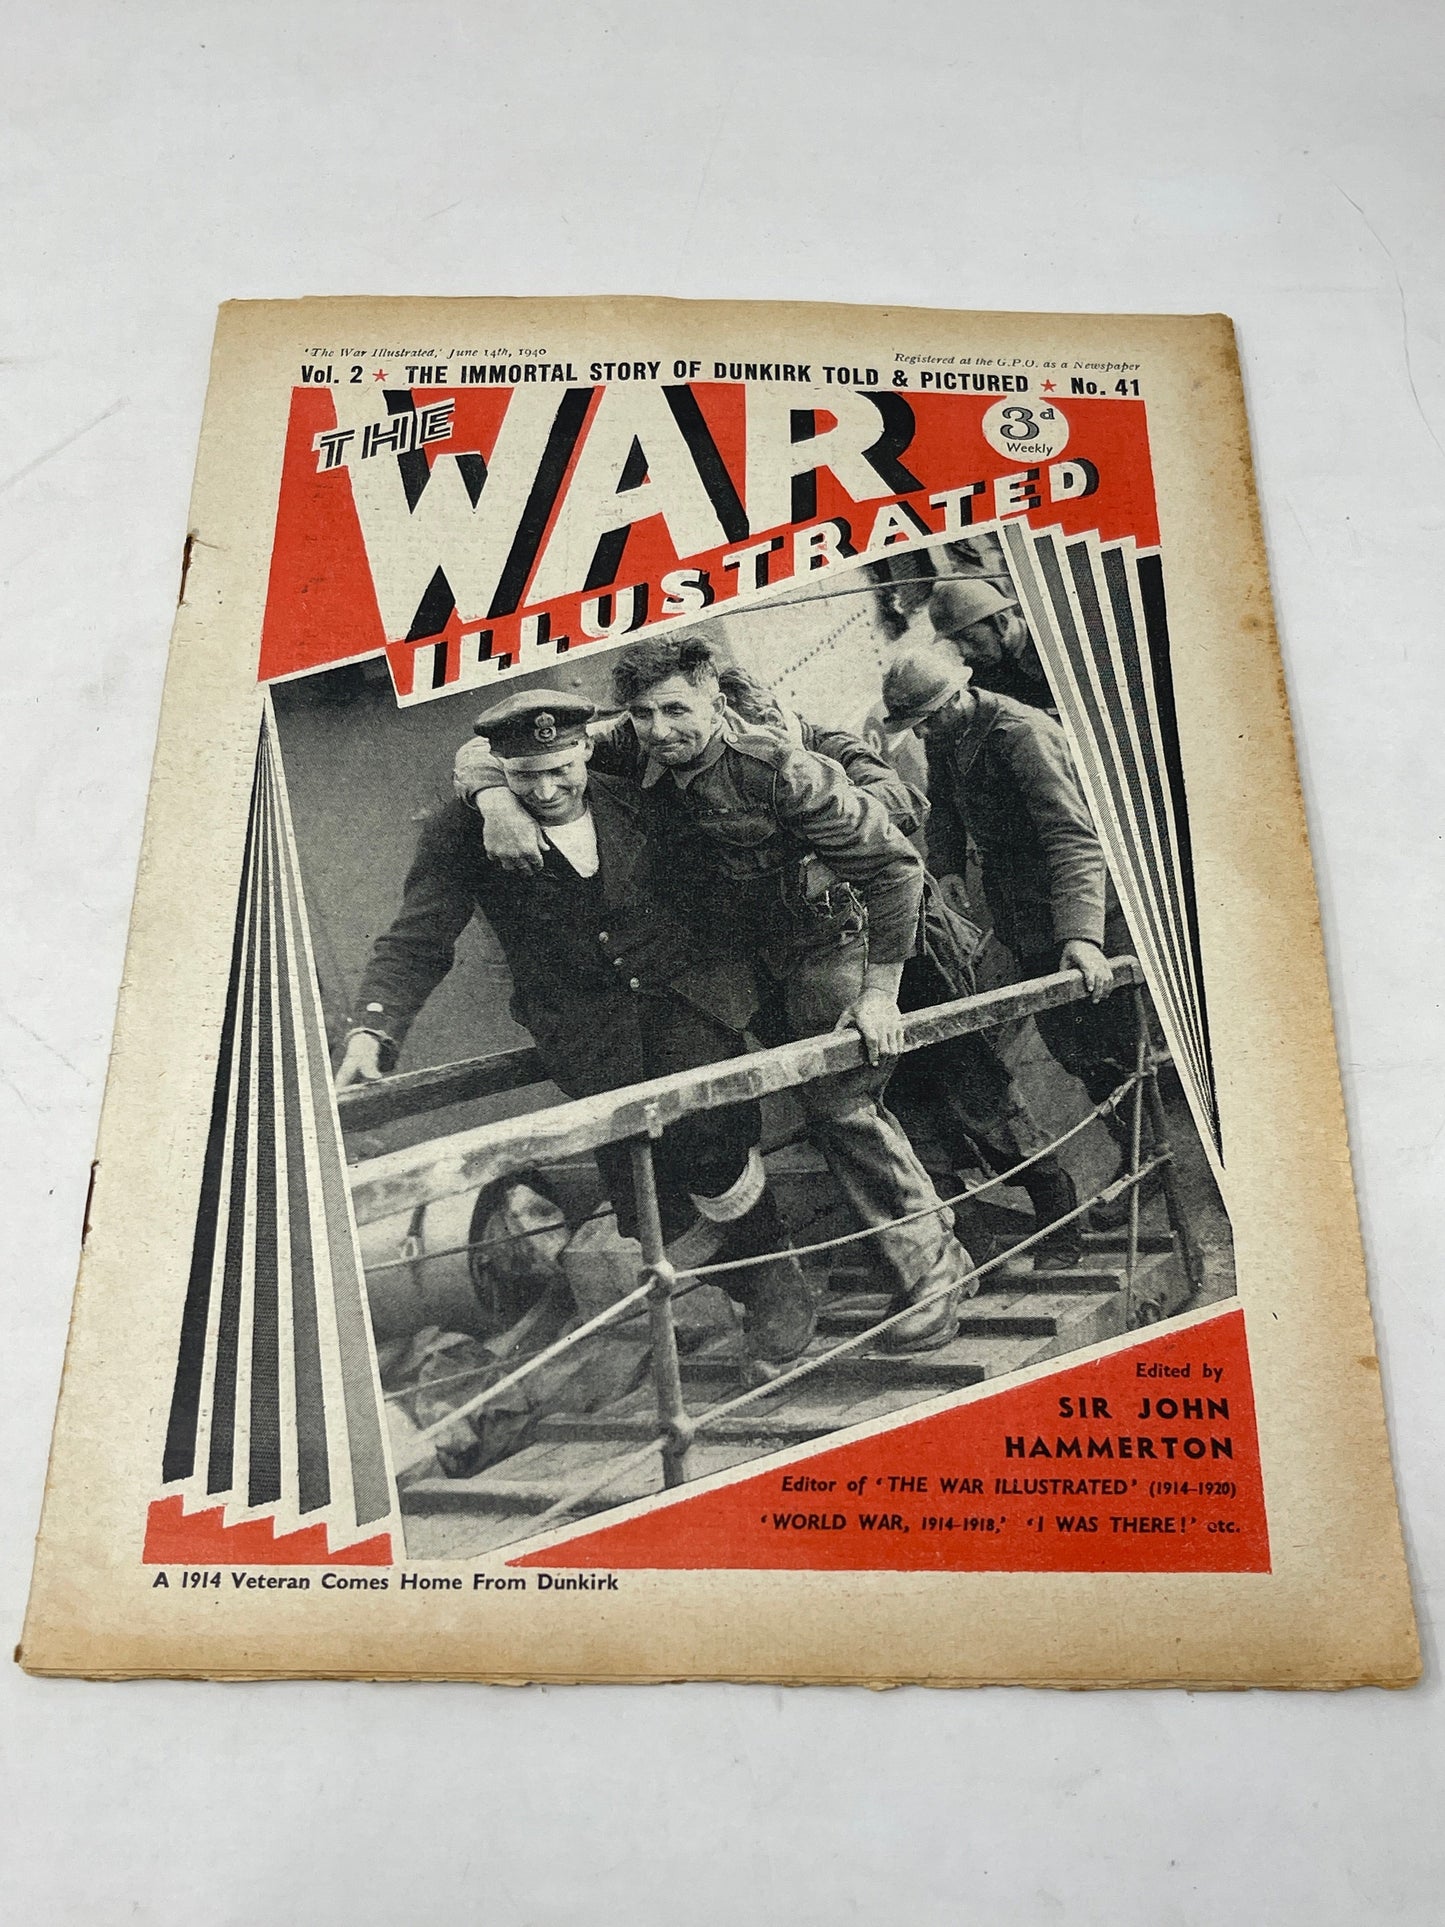 The War Illustrated No41